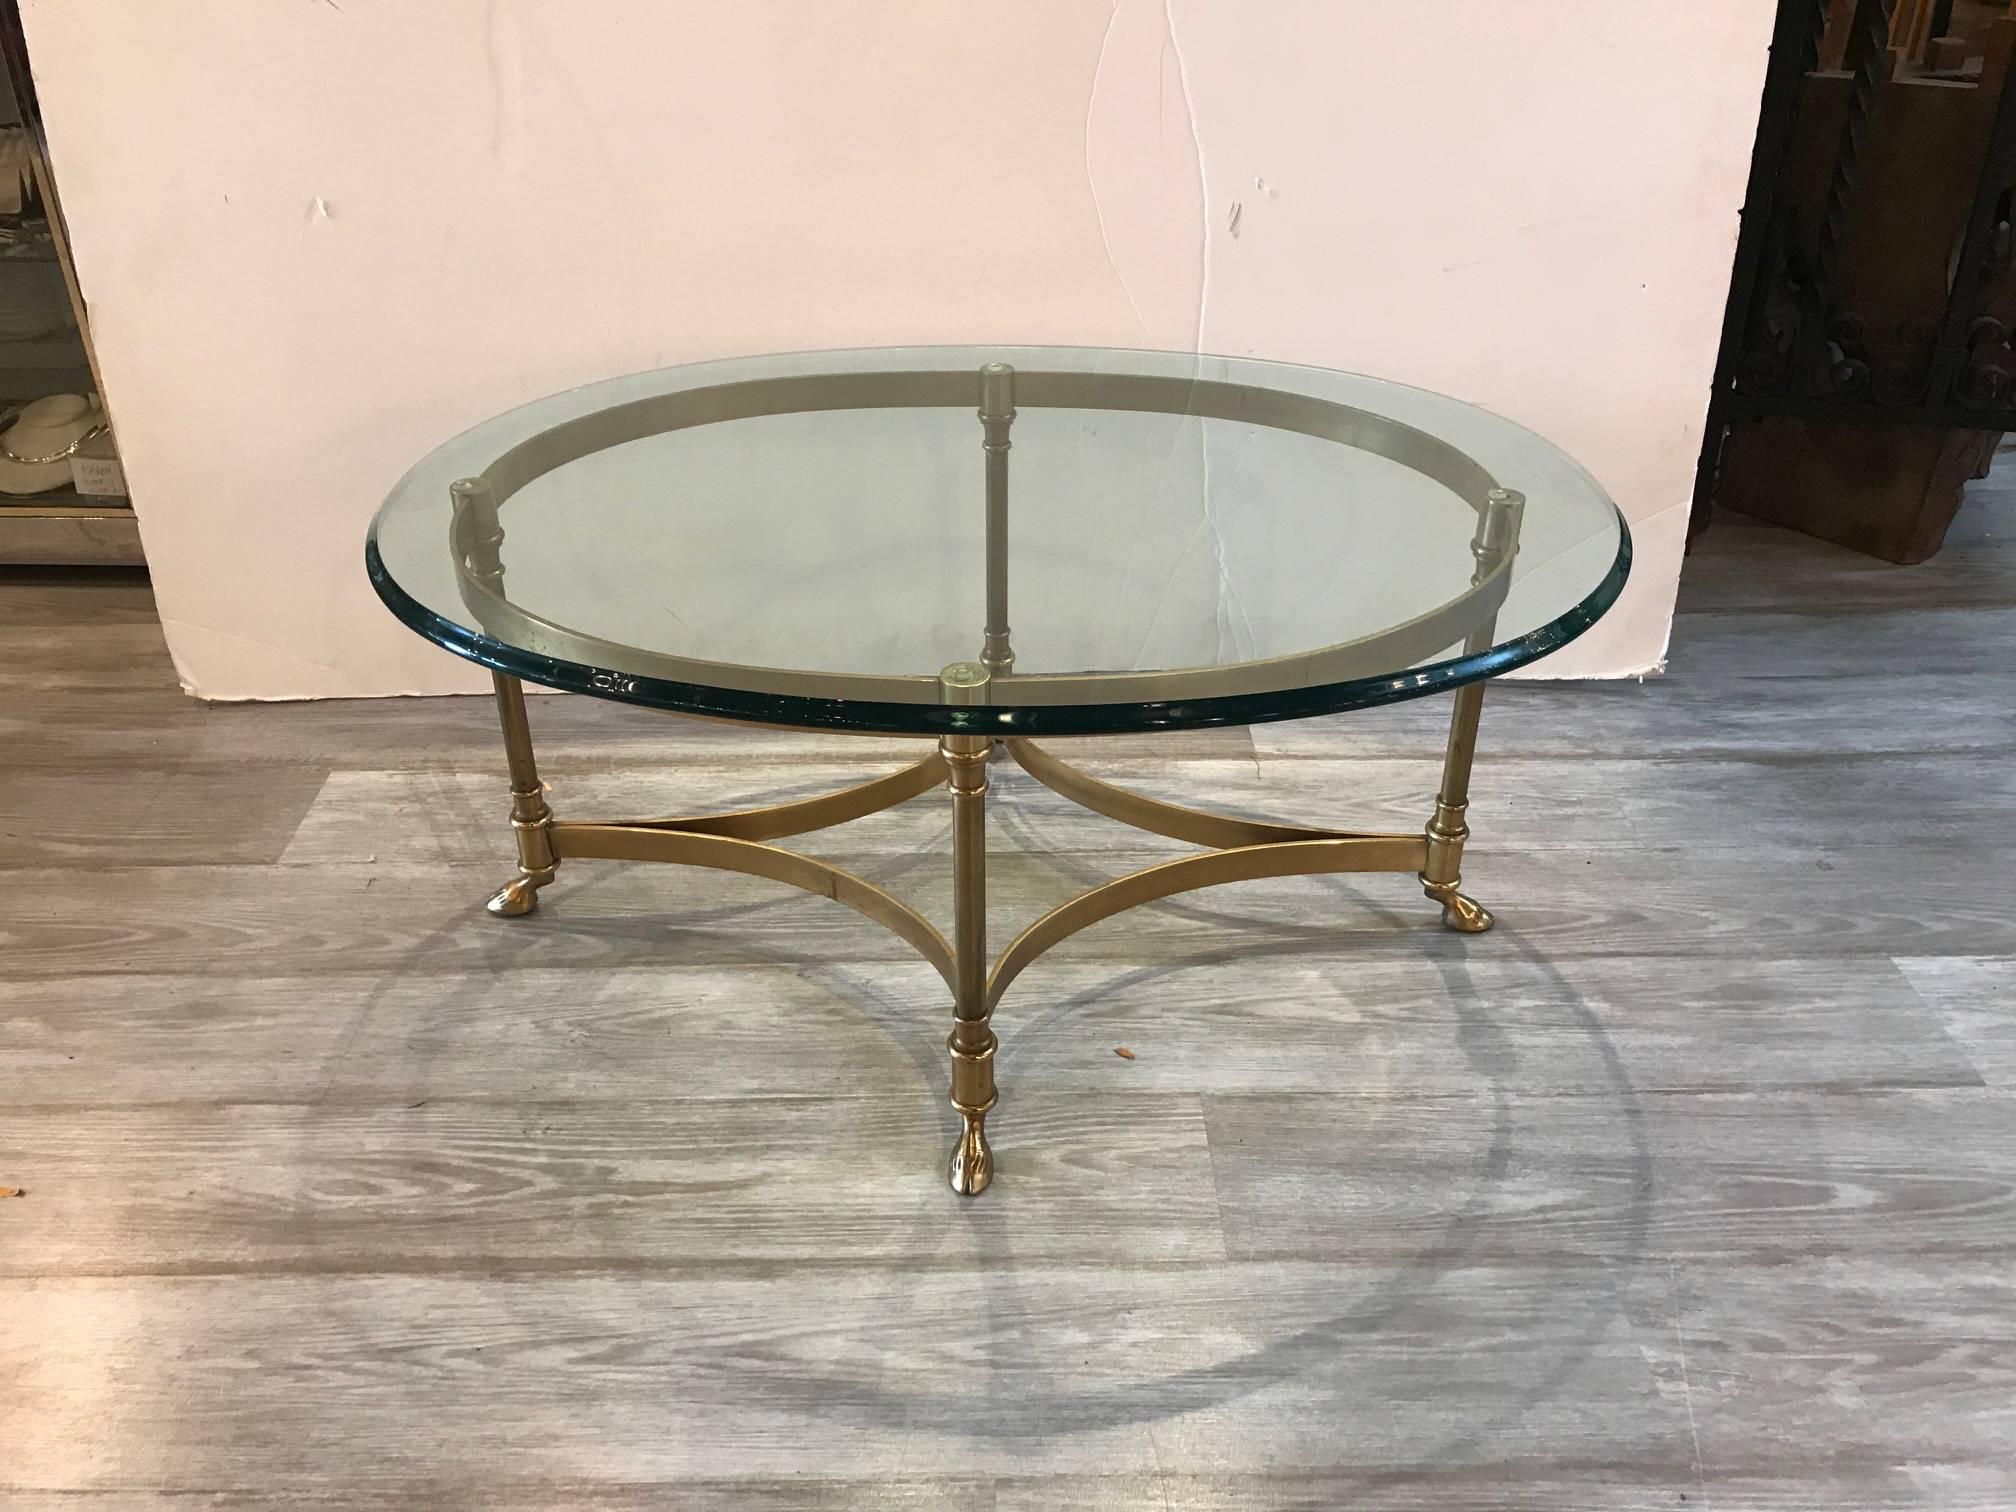 A Classic brass and glass cocktail table by Labarge with thick glass top and iconic hoof footed brass base. Rare diminutive size.